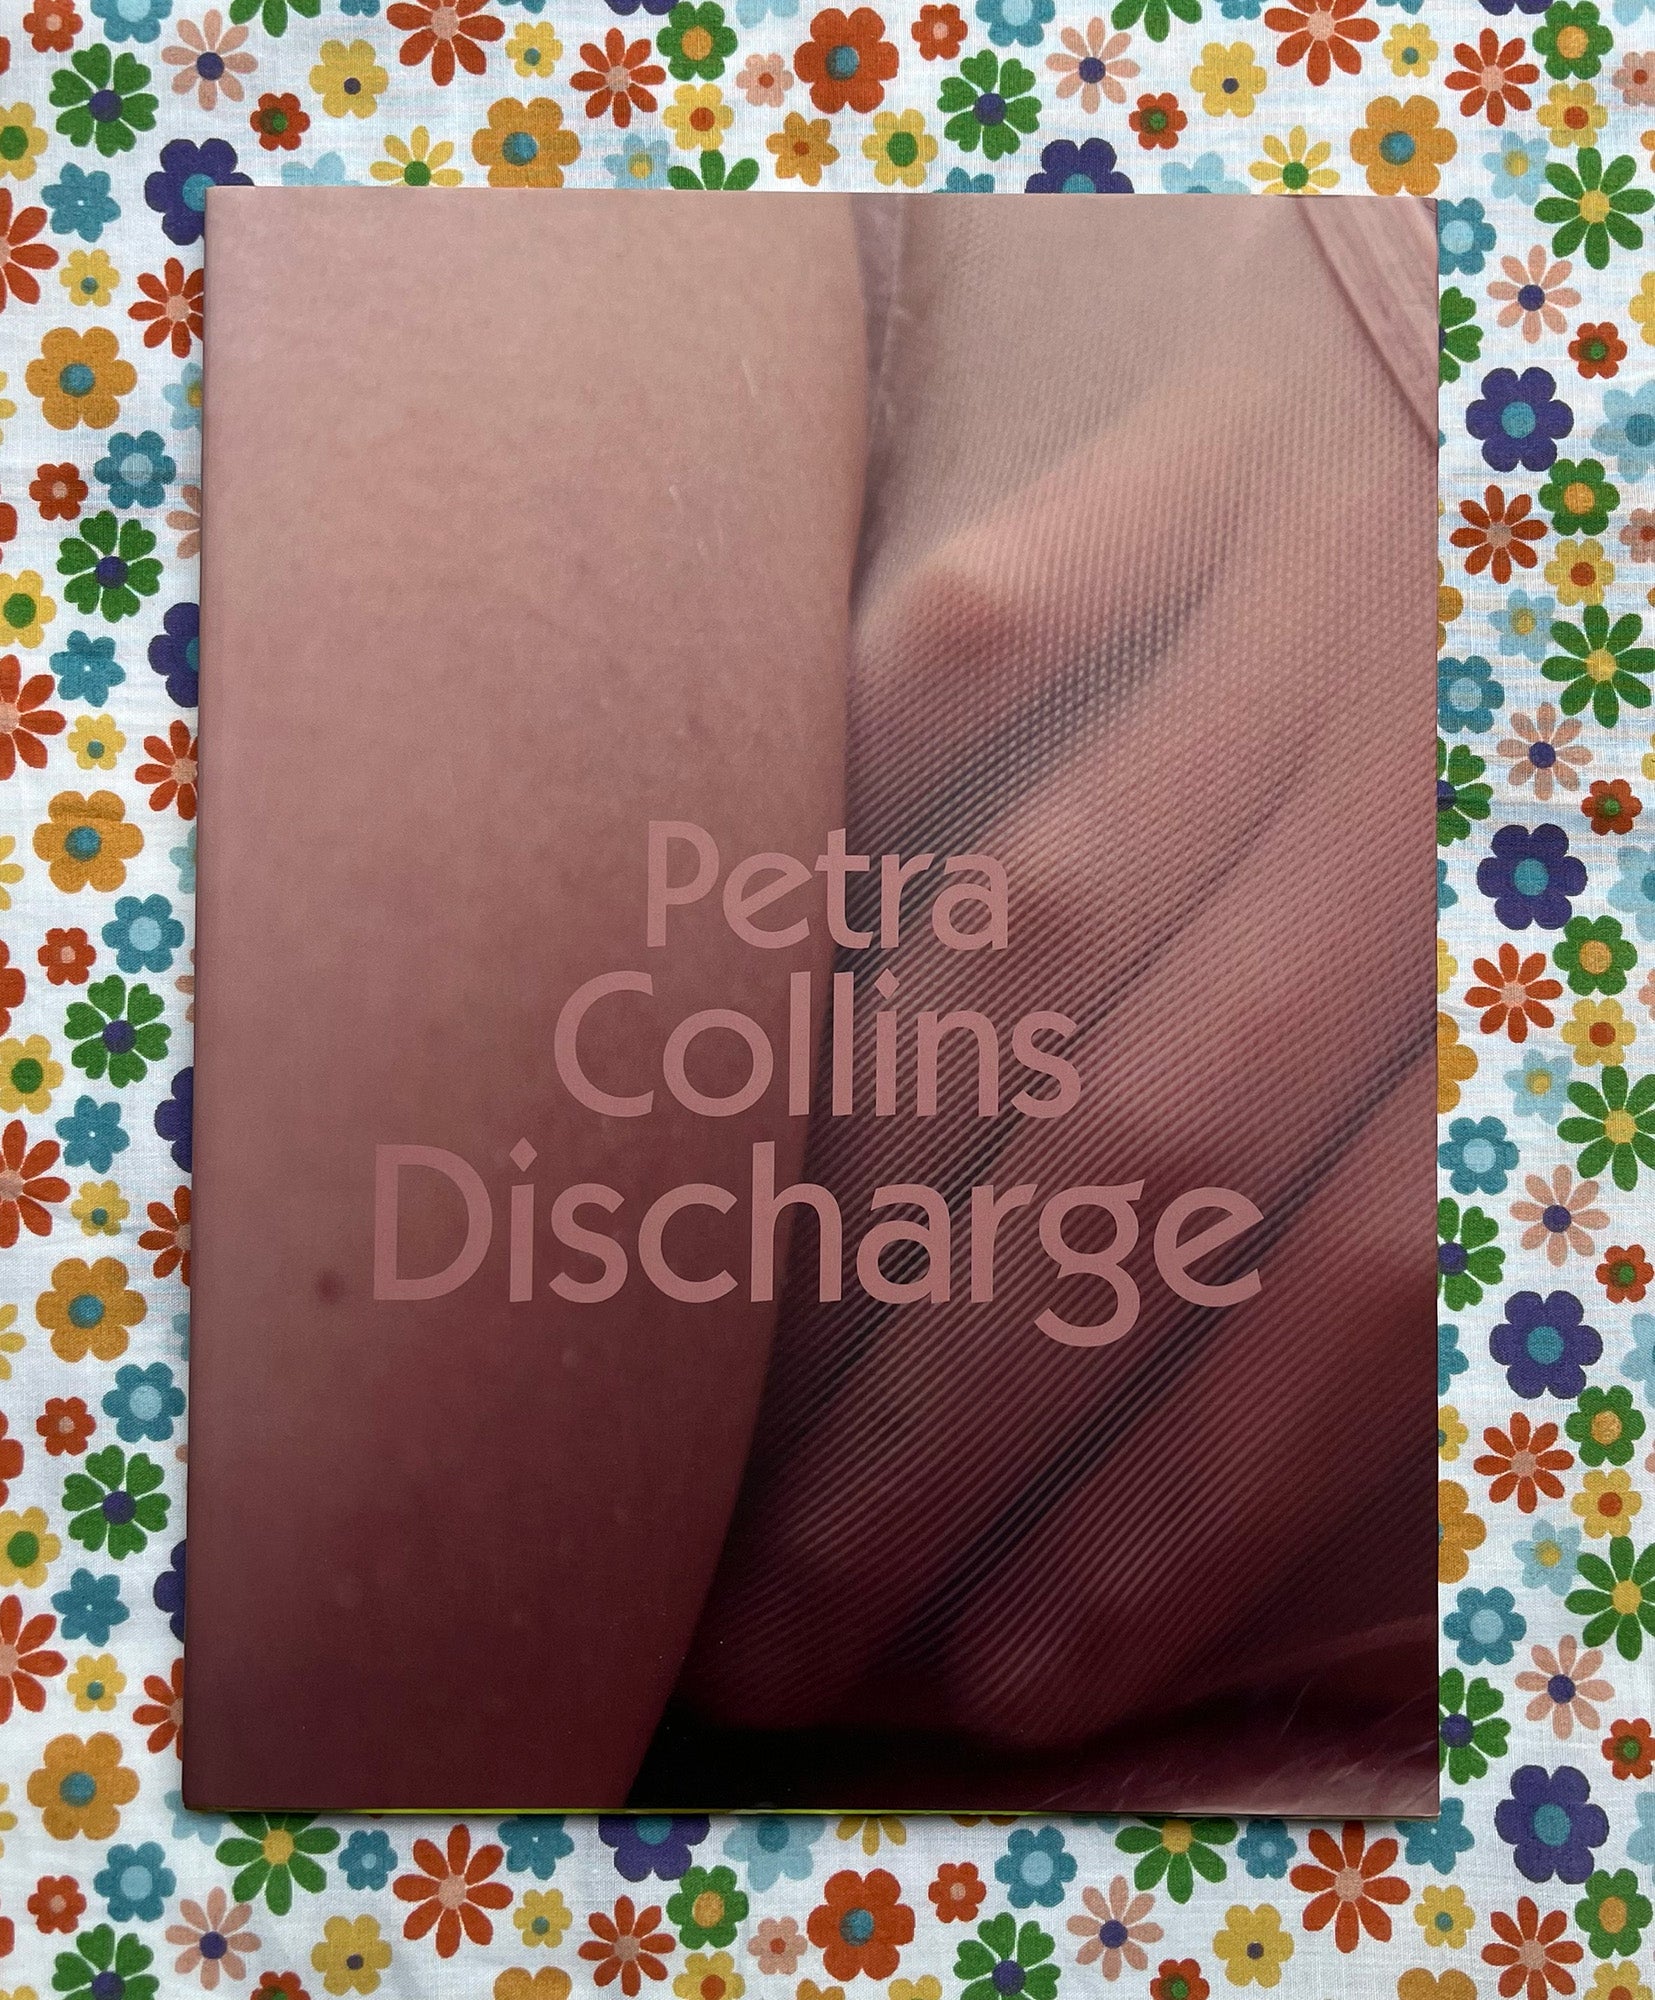 Discharge by Petra Collins on Dashwood Books